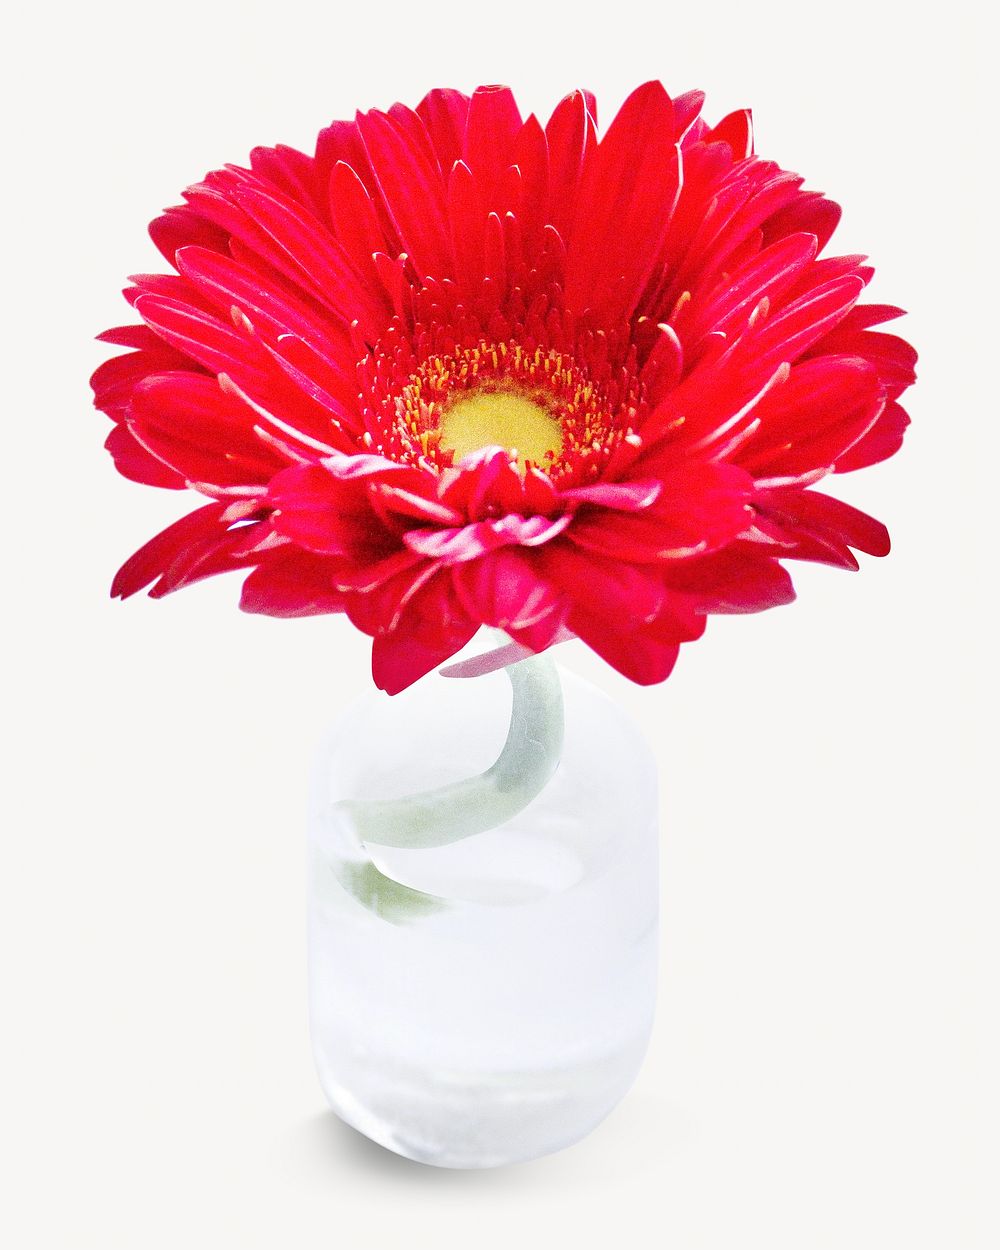 Red blooming gerbera  isolated image on white